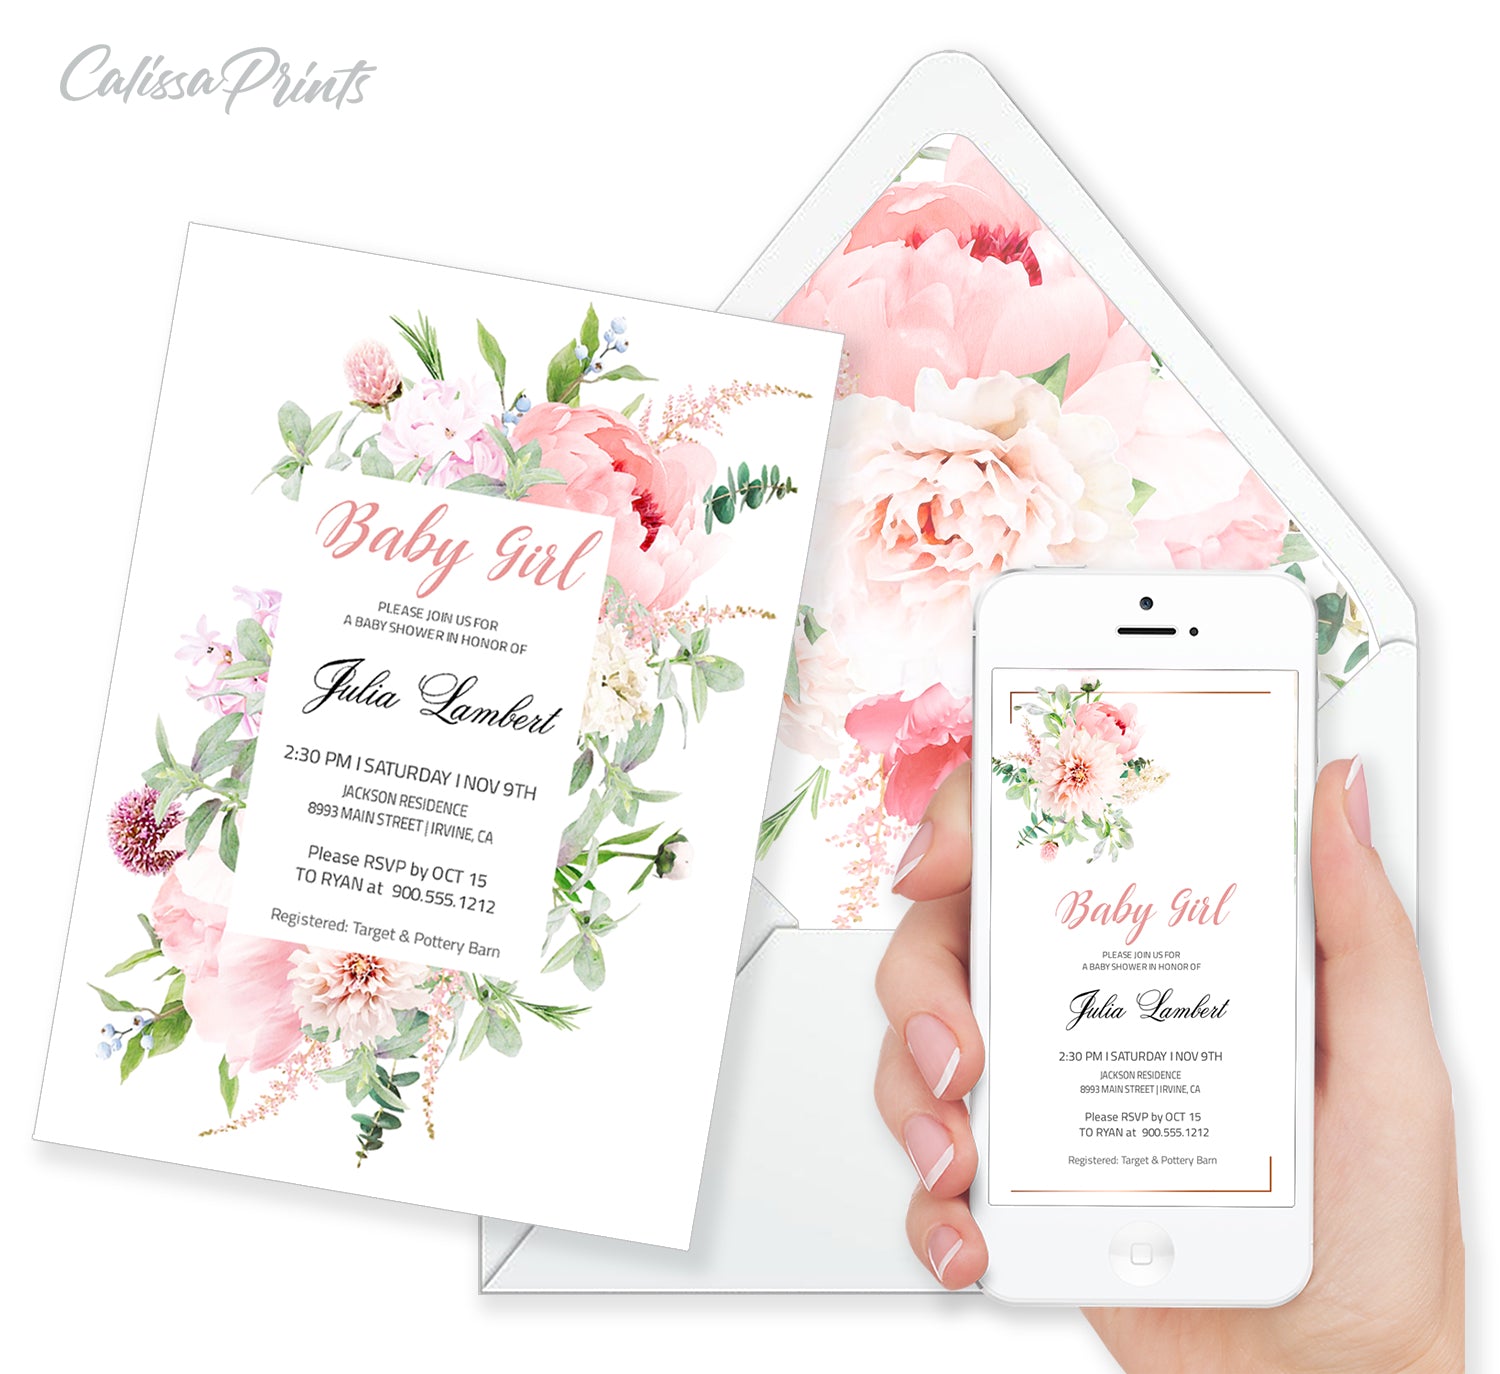 Baby Shower Party Invitation Editable Template Combo - Etheral Rose Design, BABY01 - CalissaPrints